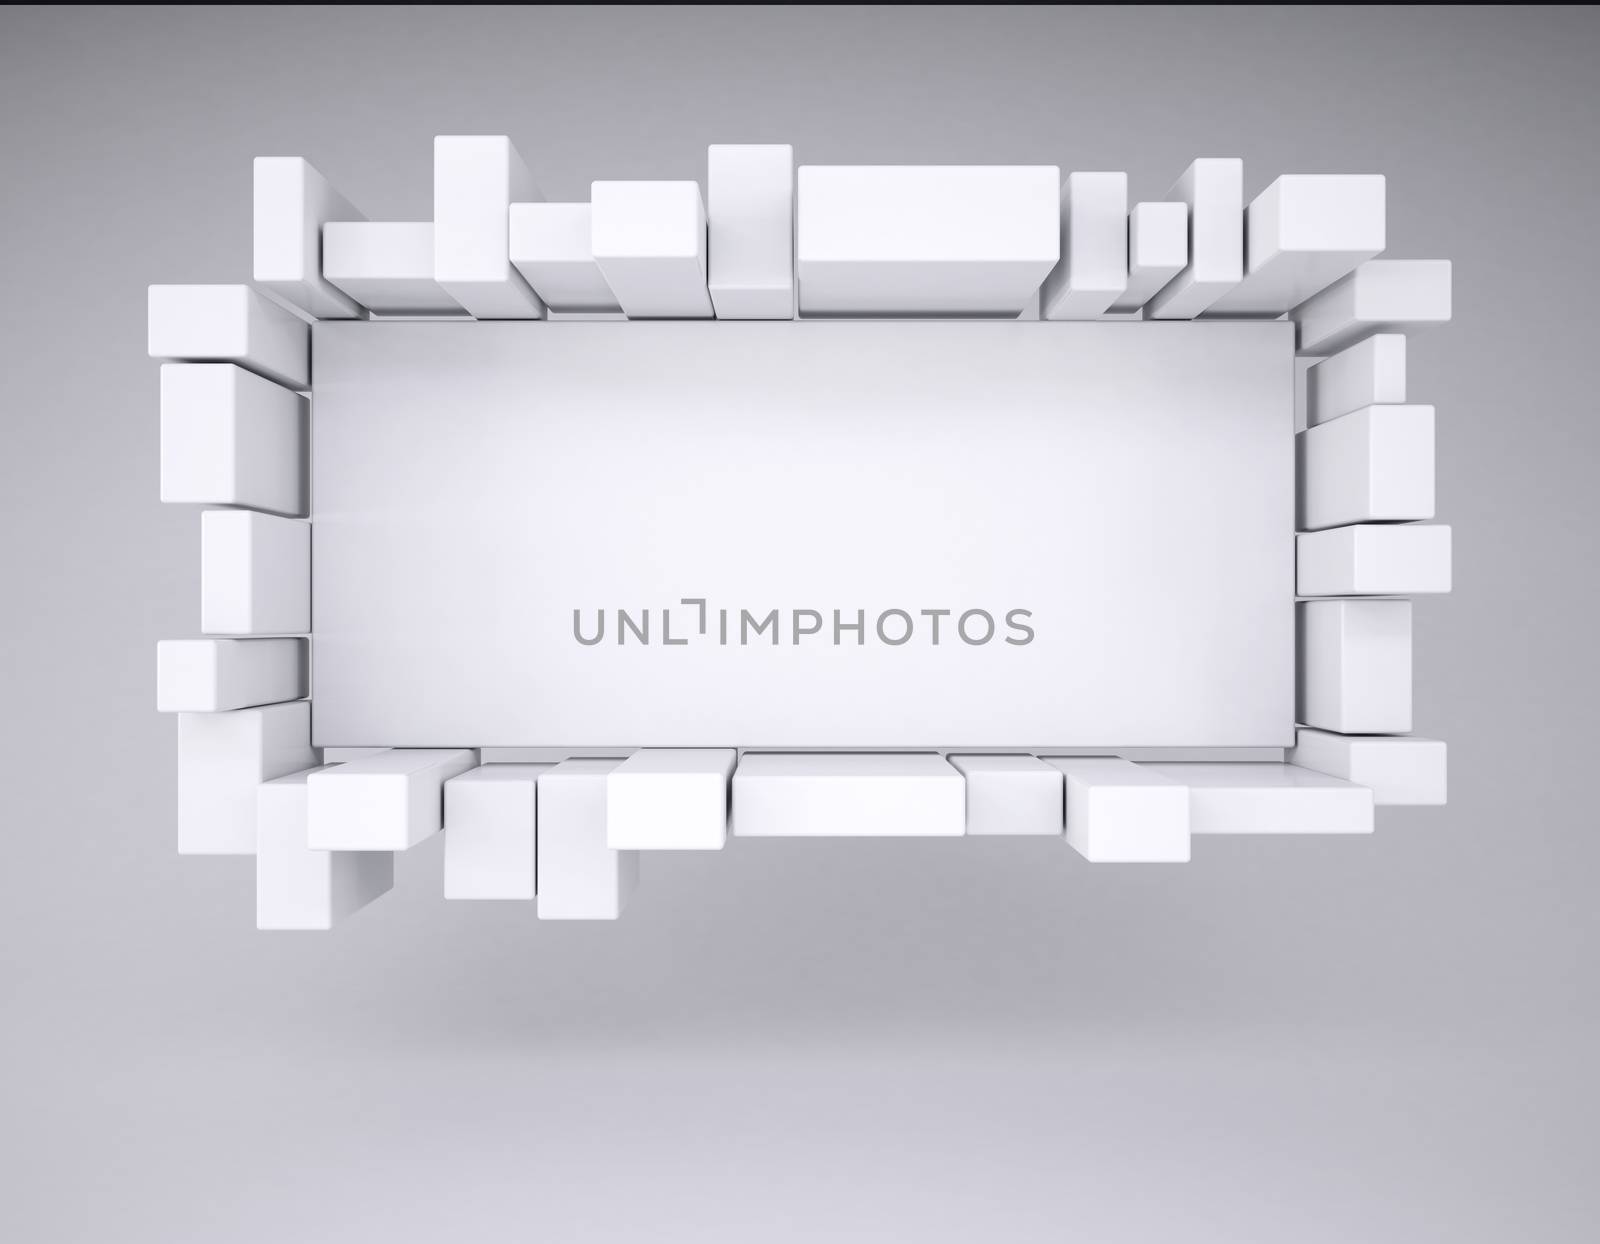 Advertising board. Studio render on a gray background